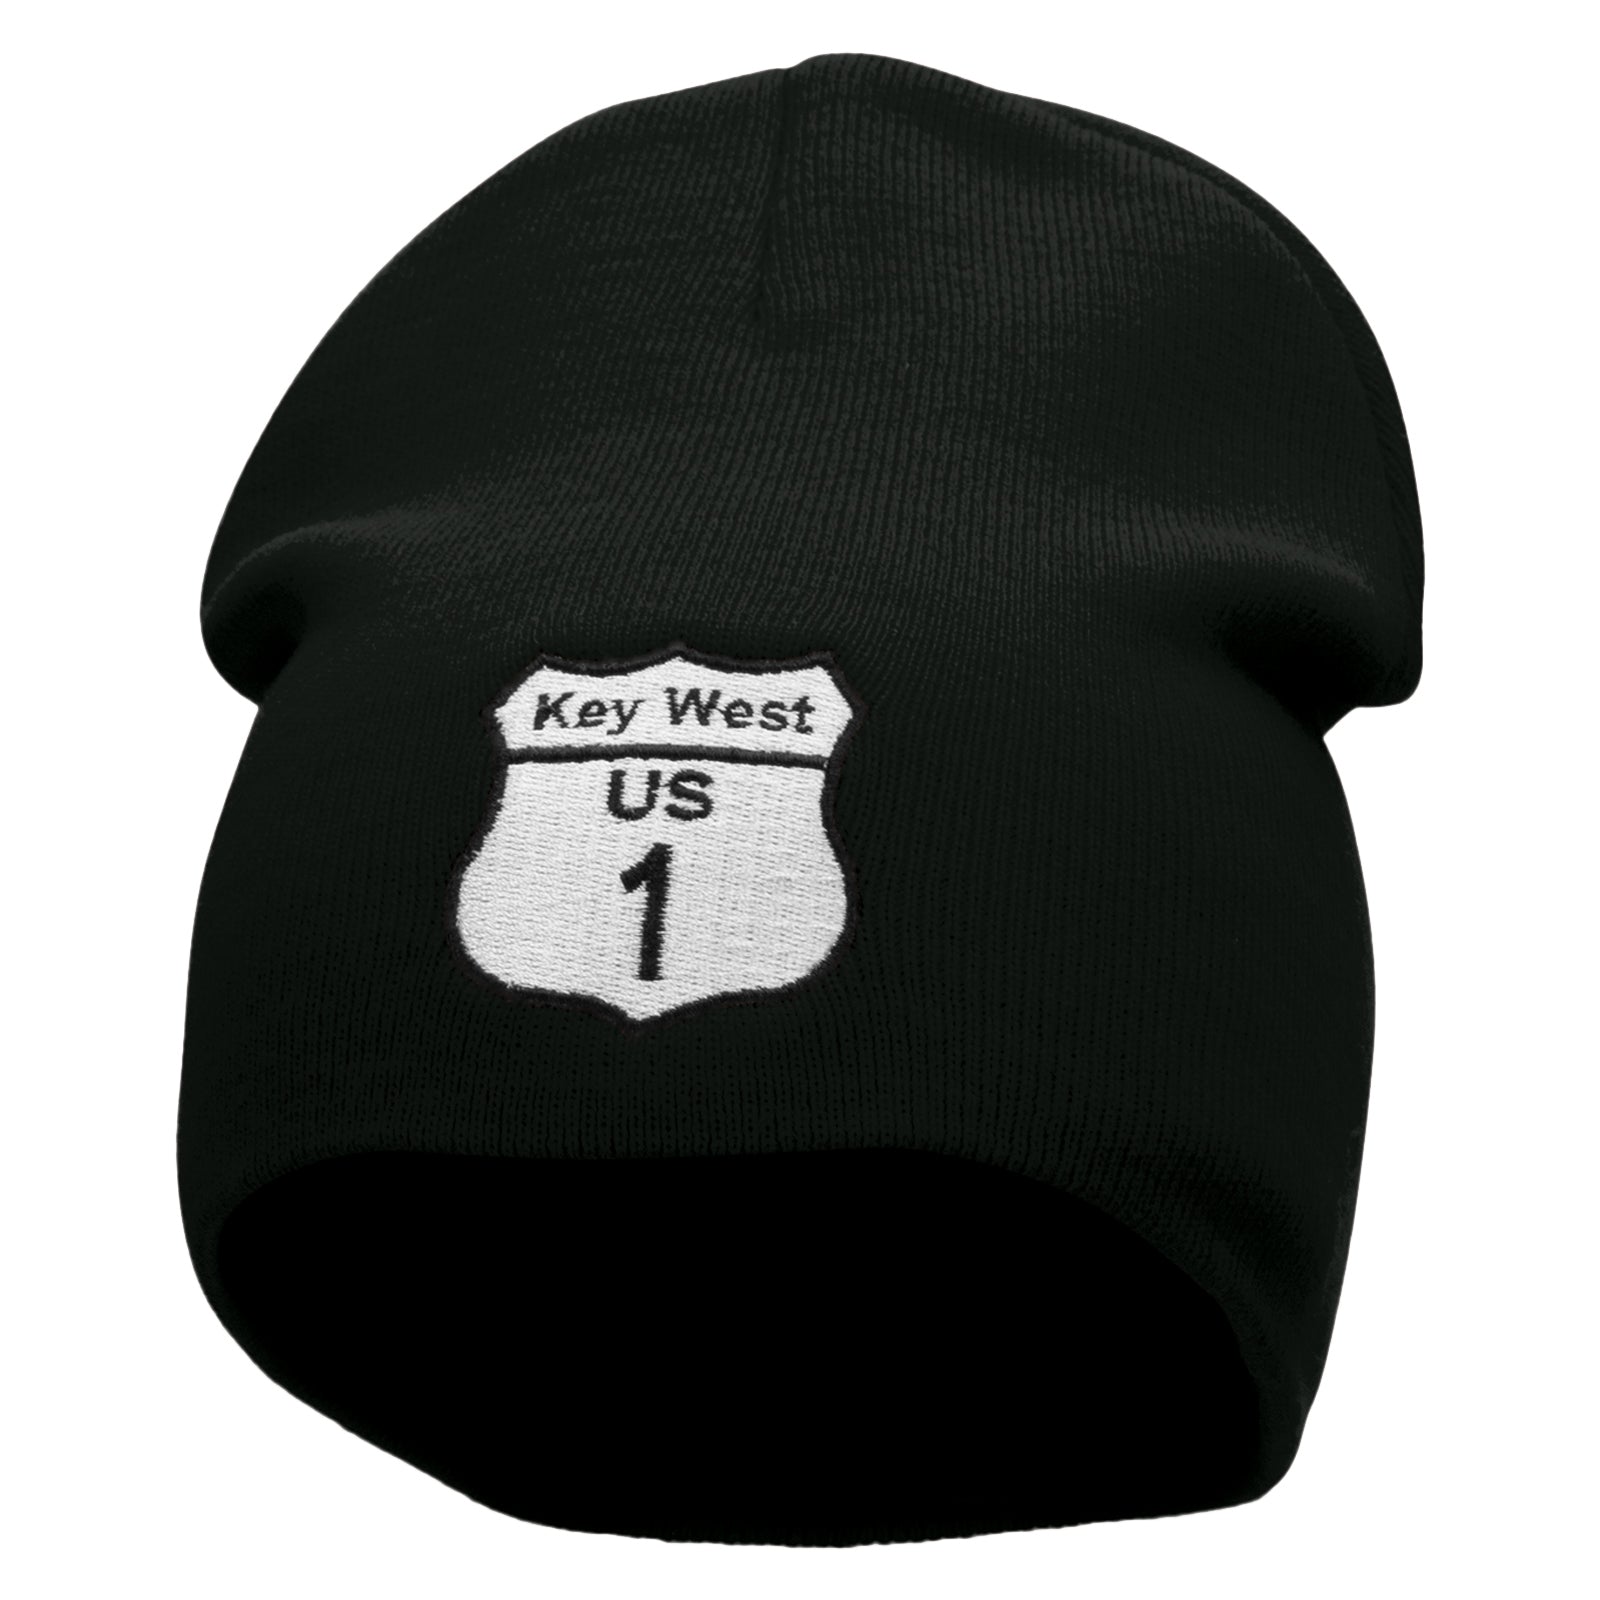 Route Key West 1 Sign Embroidered 8 Inch Short Beanie - Black OSFM